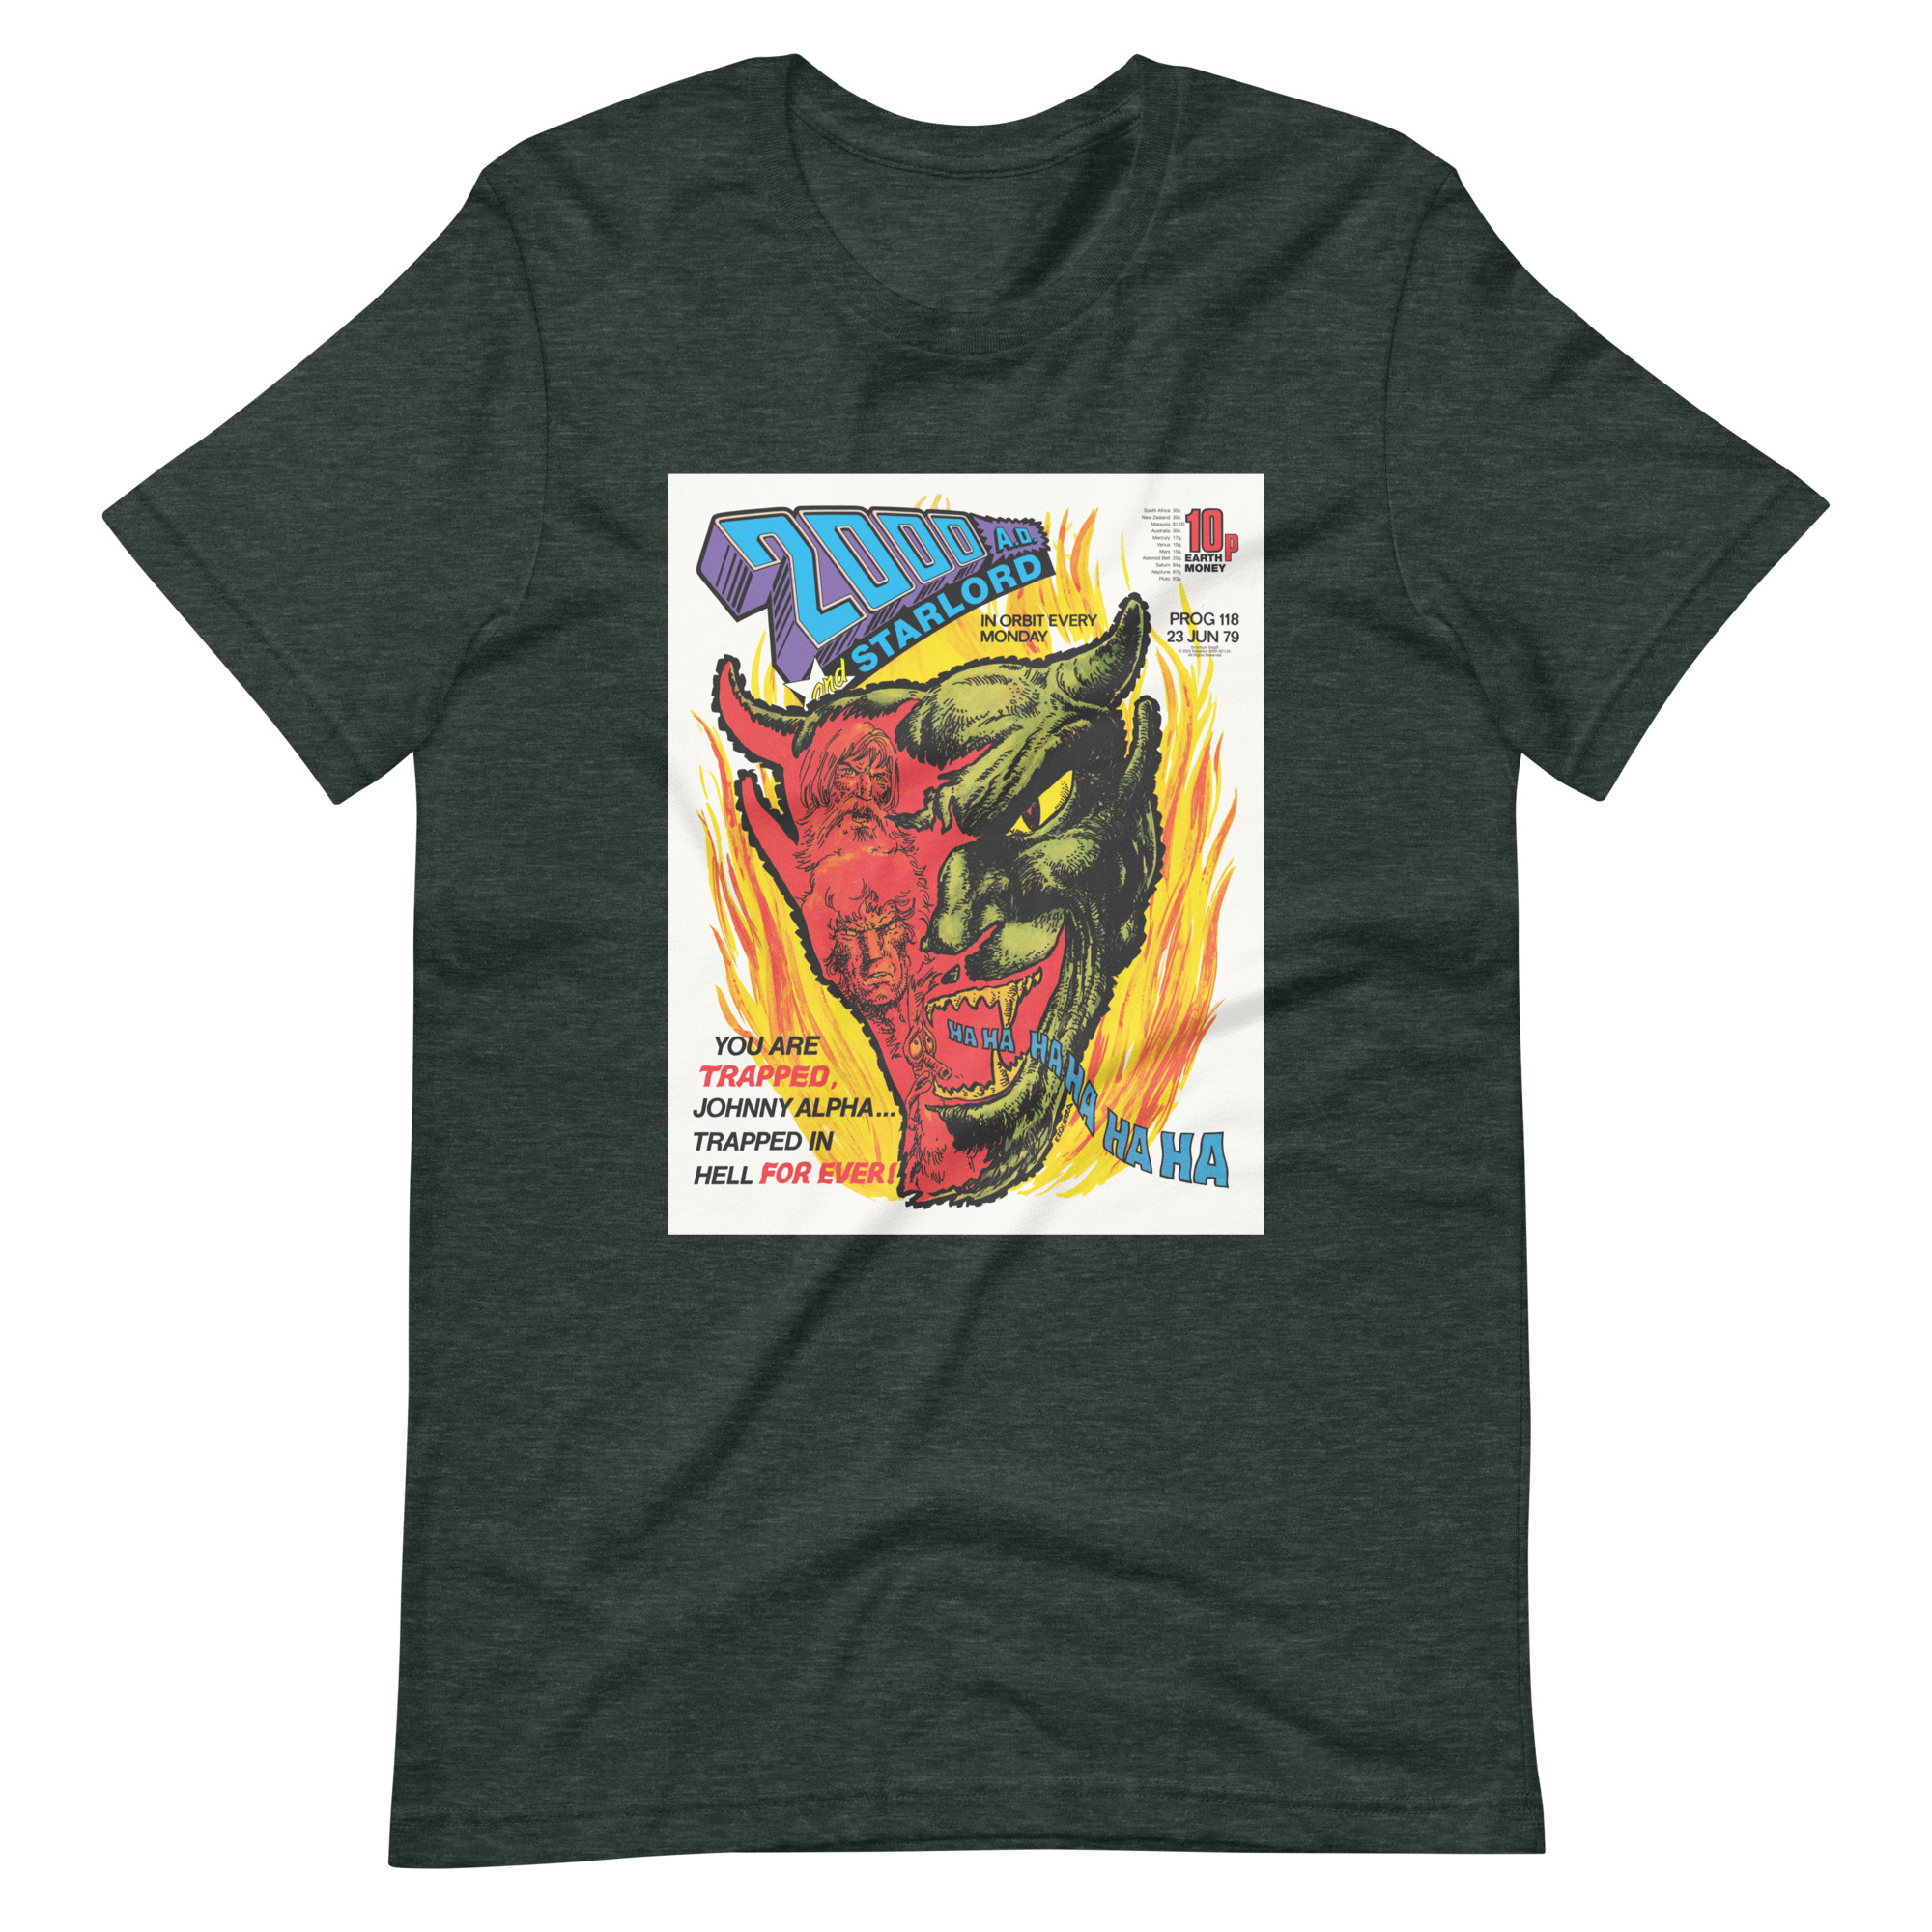 Textured Green Tshirt with an image on the chest. Image is cover of 2000 AD prog 118 and depicts a laughing Devil face in flames